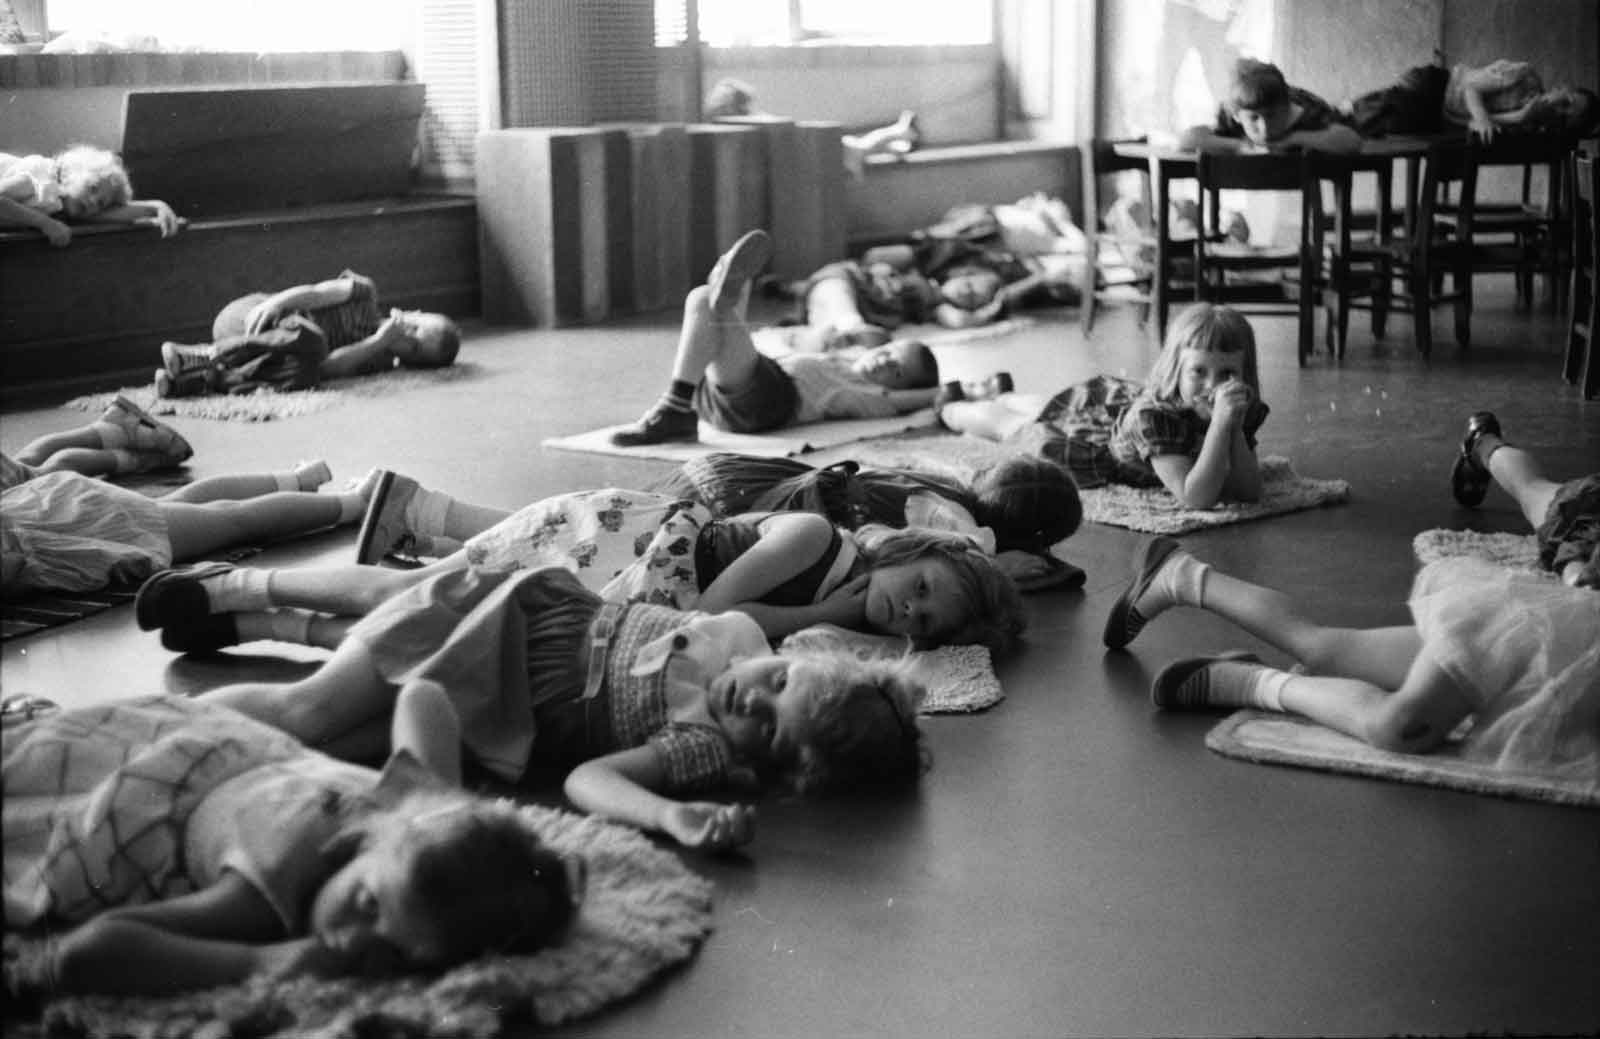 Napping at School and The Science of Chronobiology: children lying awake while they are supposed to be napping at school